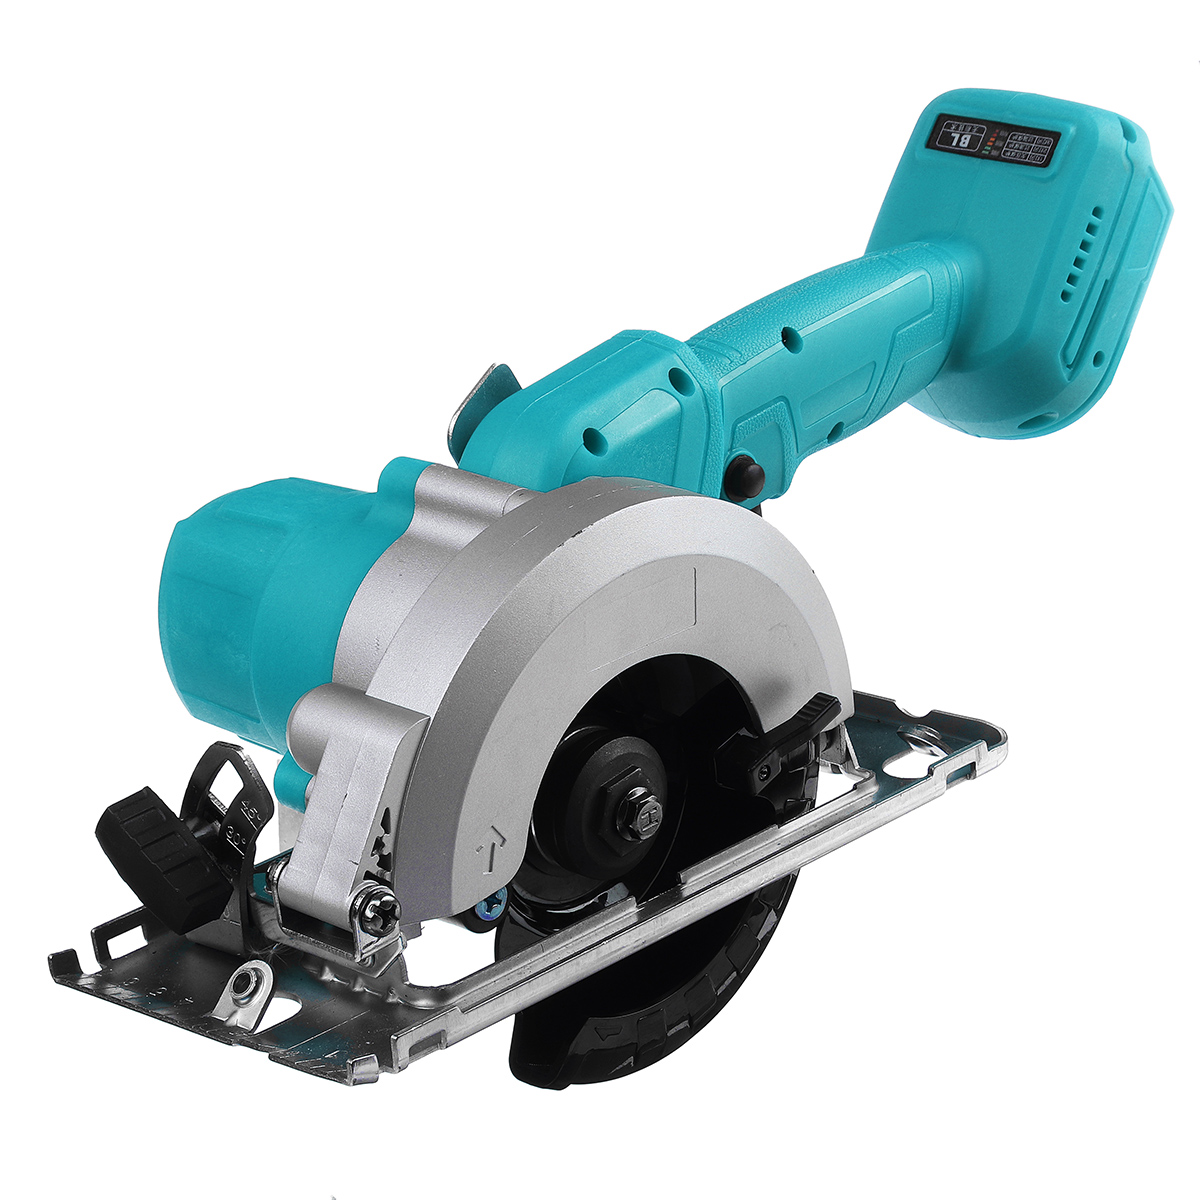 1580W-Cordless-Electric-Circular-Saw-Portable-Woodworking-Cutter-For-Makita-18V-Battery-1786906-7